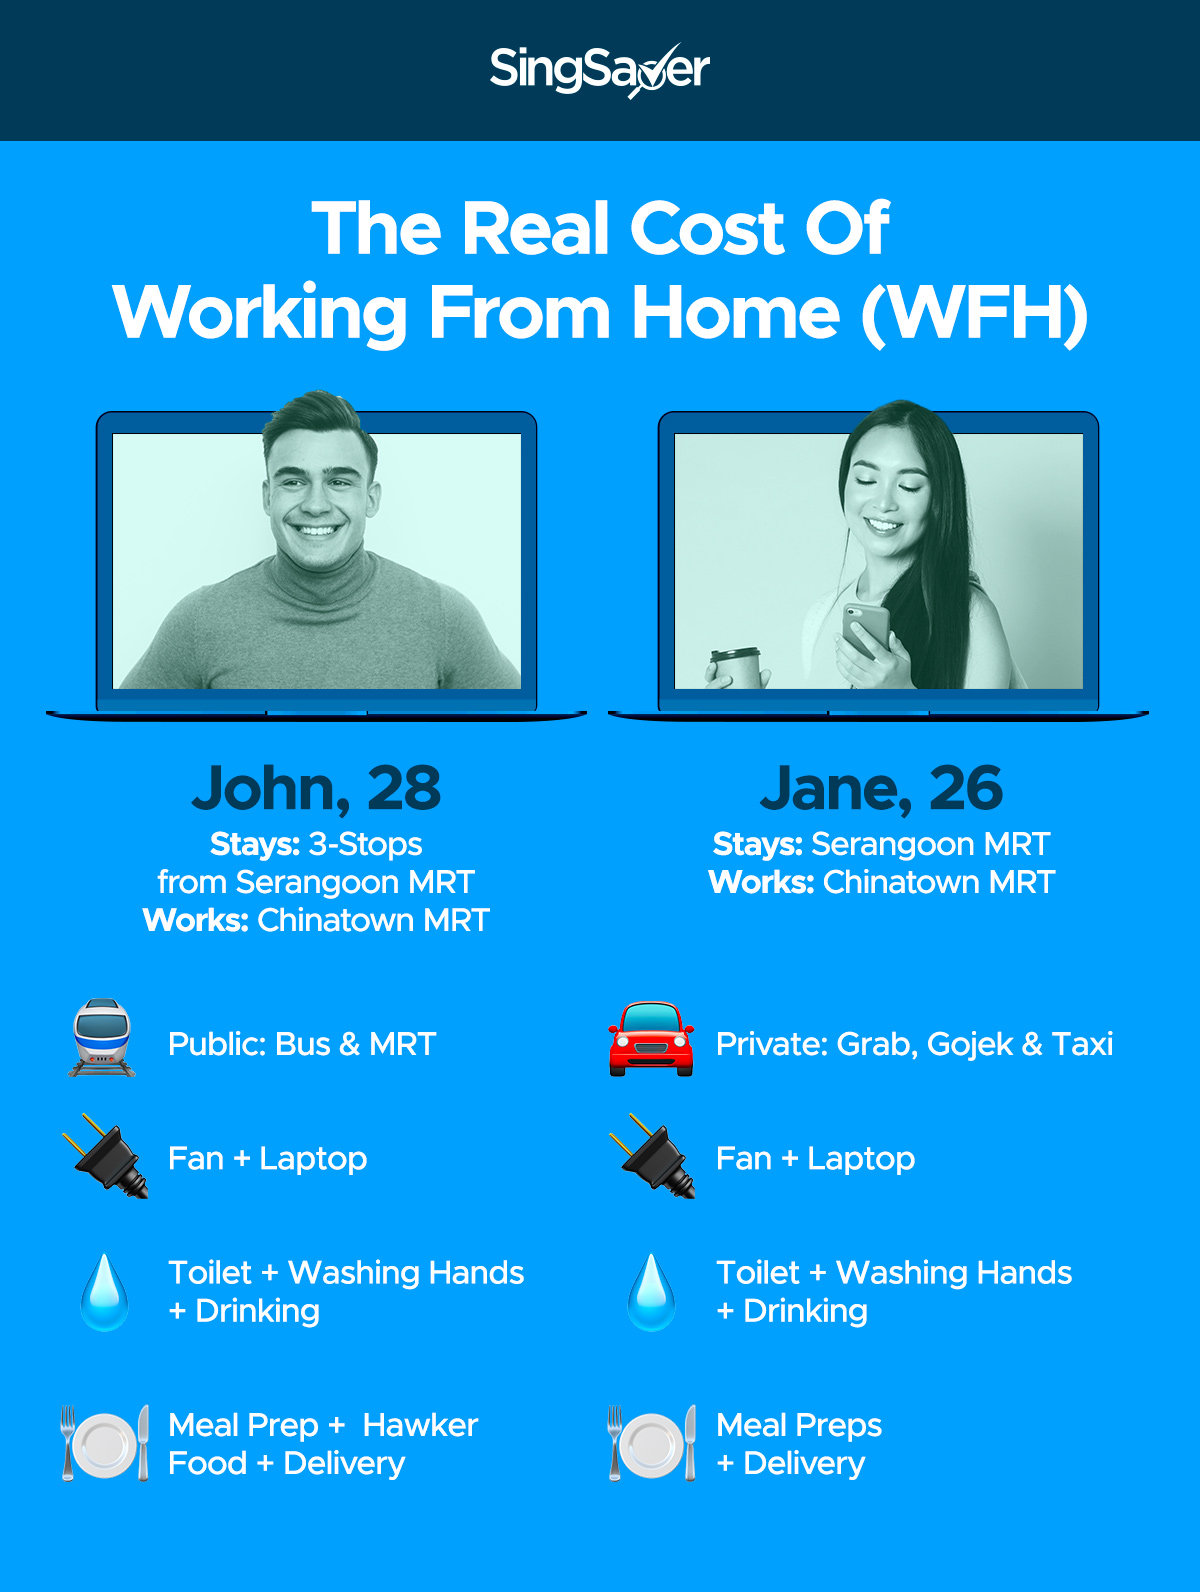 The Real Cost Of WFH